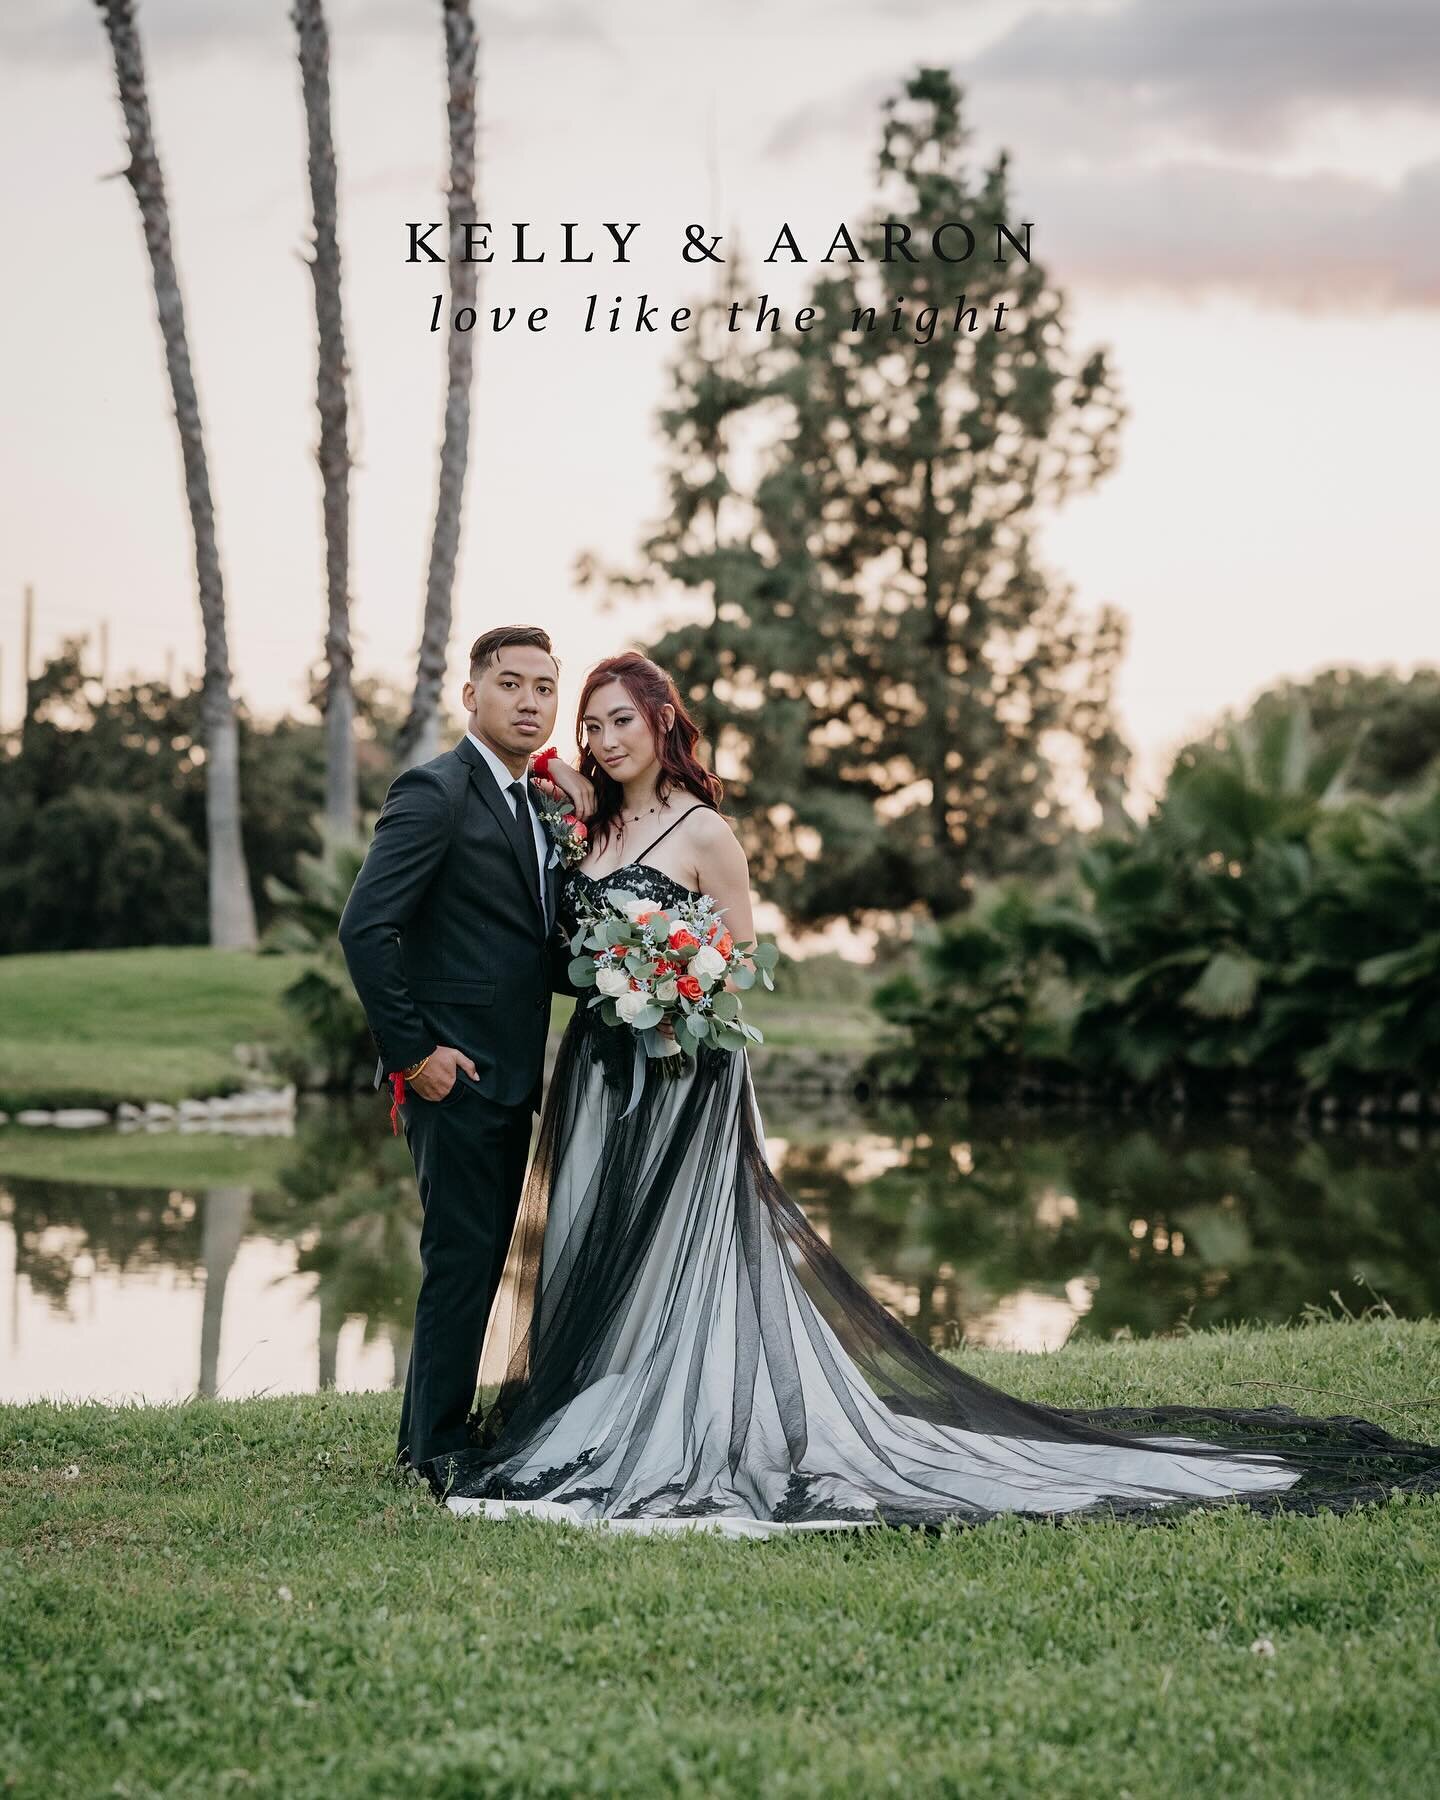 【𝒍𝒐𝒗𝒆 𝒍𝒊𝒌𝒆 𝒕𝒉𝒆 𝒏𝒊𝒈𝒉𝒕】 At the beginning of October, I got to photograph this moody modern wedding for Kelly &amp; Aaron at the beautiful Sierra La Verne nestled in the foothills of the San Gabriel Mountains. Gothic and dark colors infl